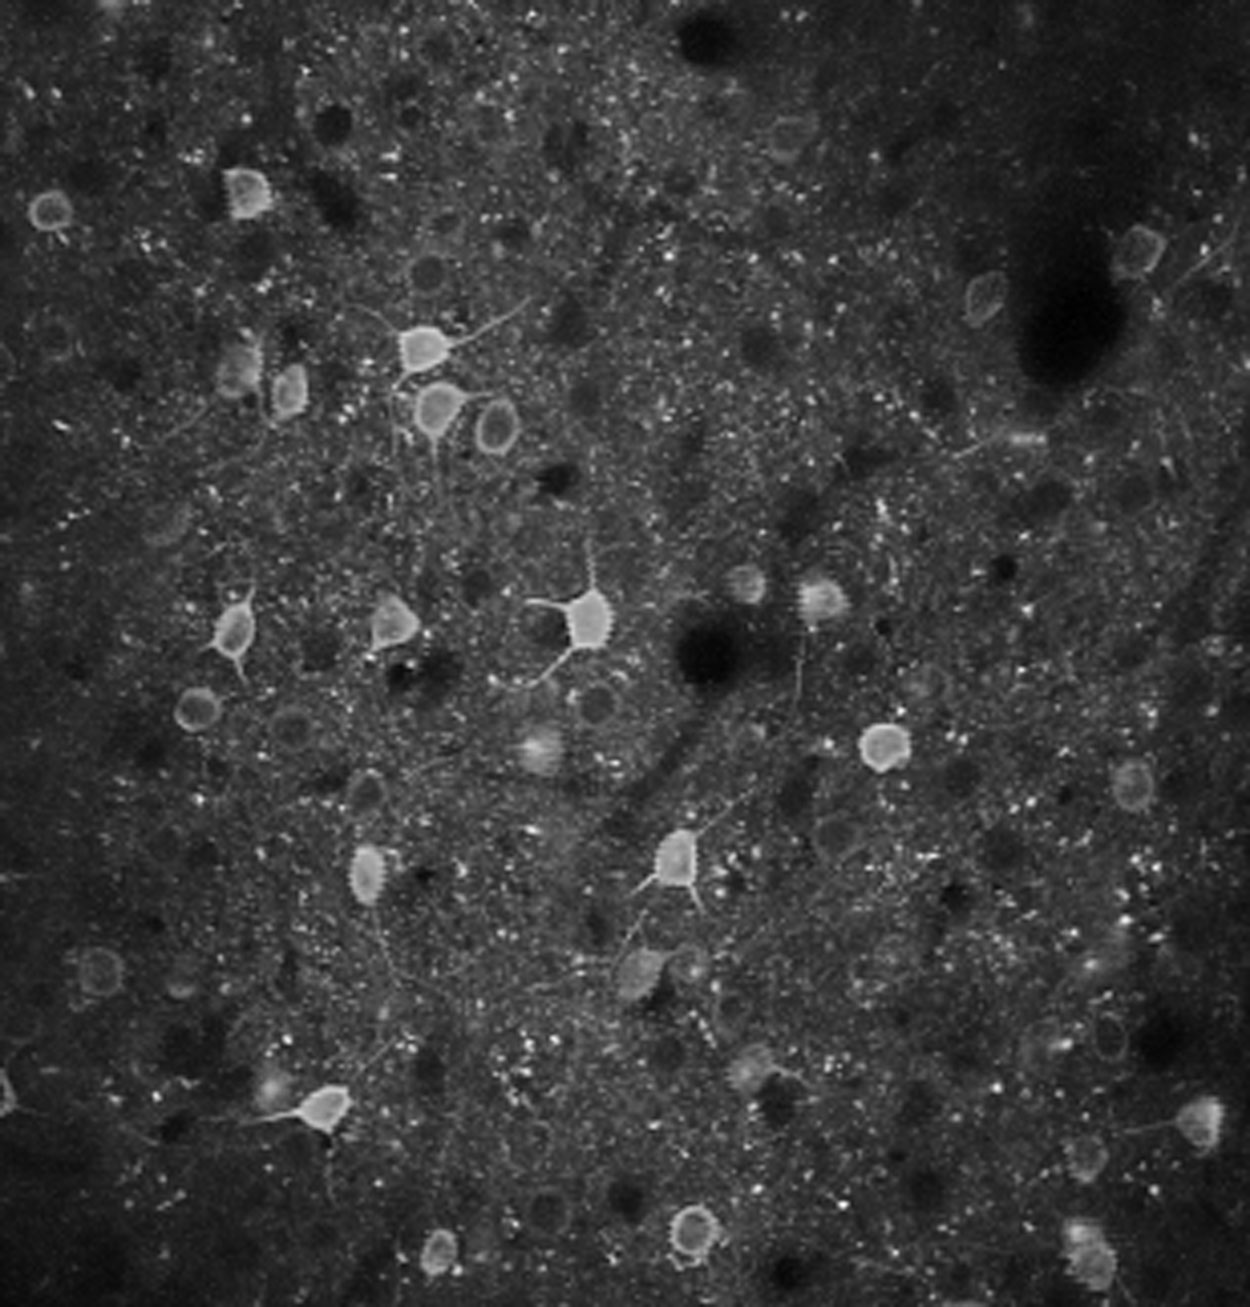 Microscopic greyscale image of neurons